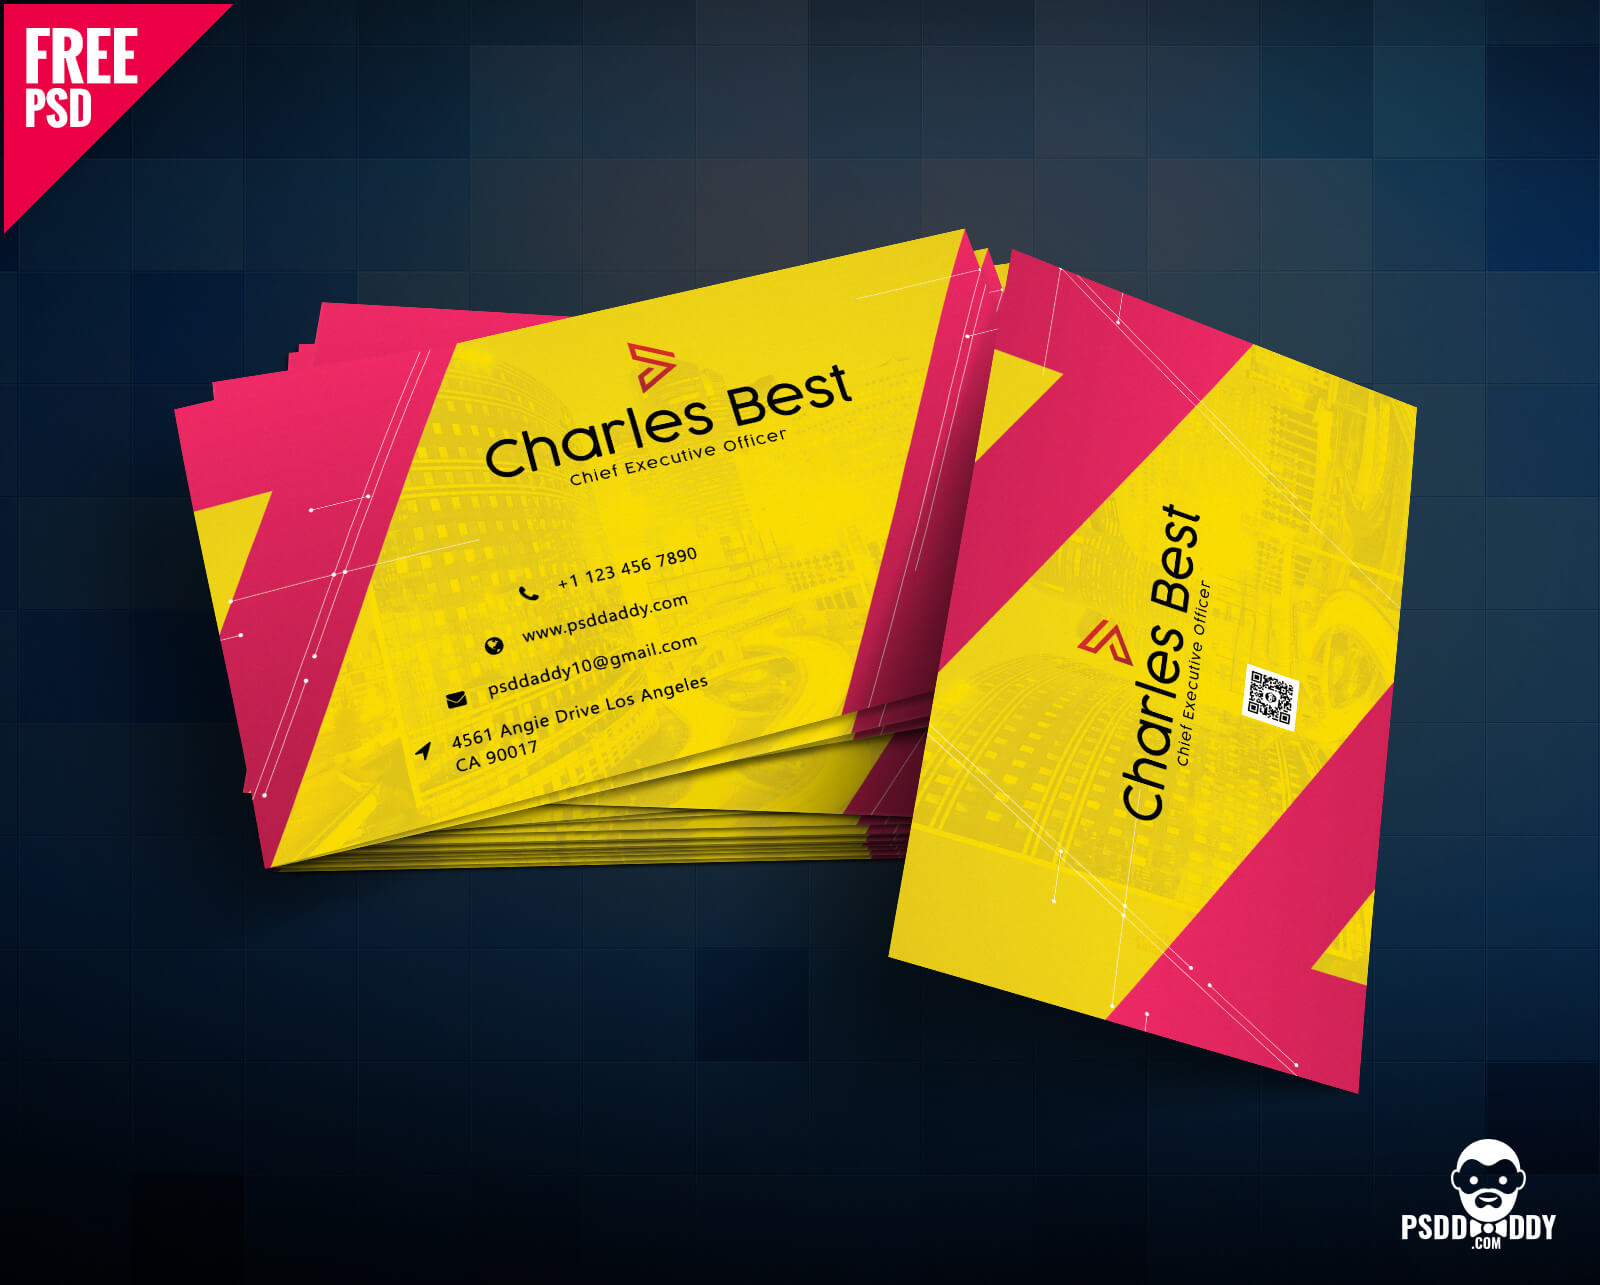 Download] Creative Business Card Free Psd | Psddaddy For Calling Card Template Psd